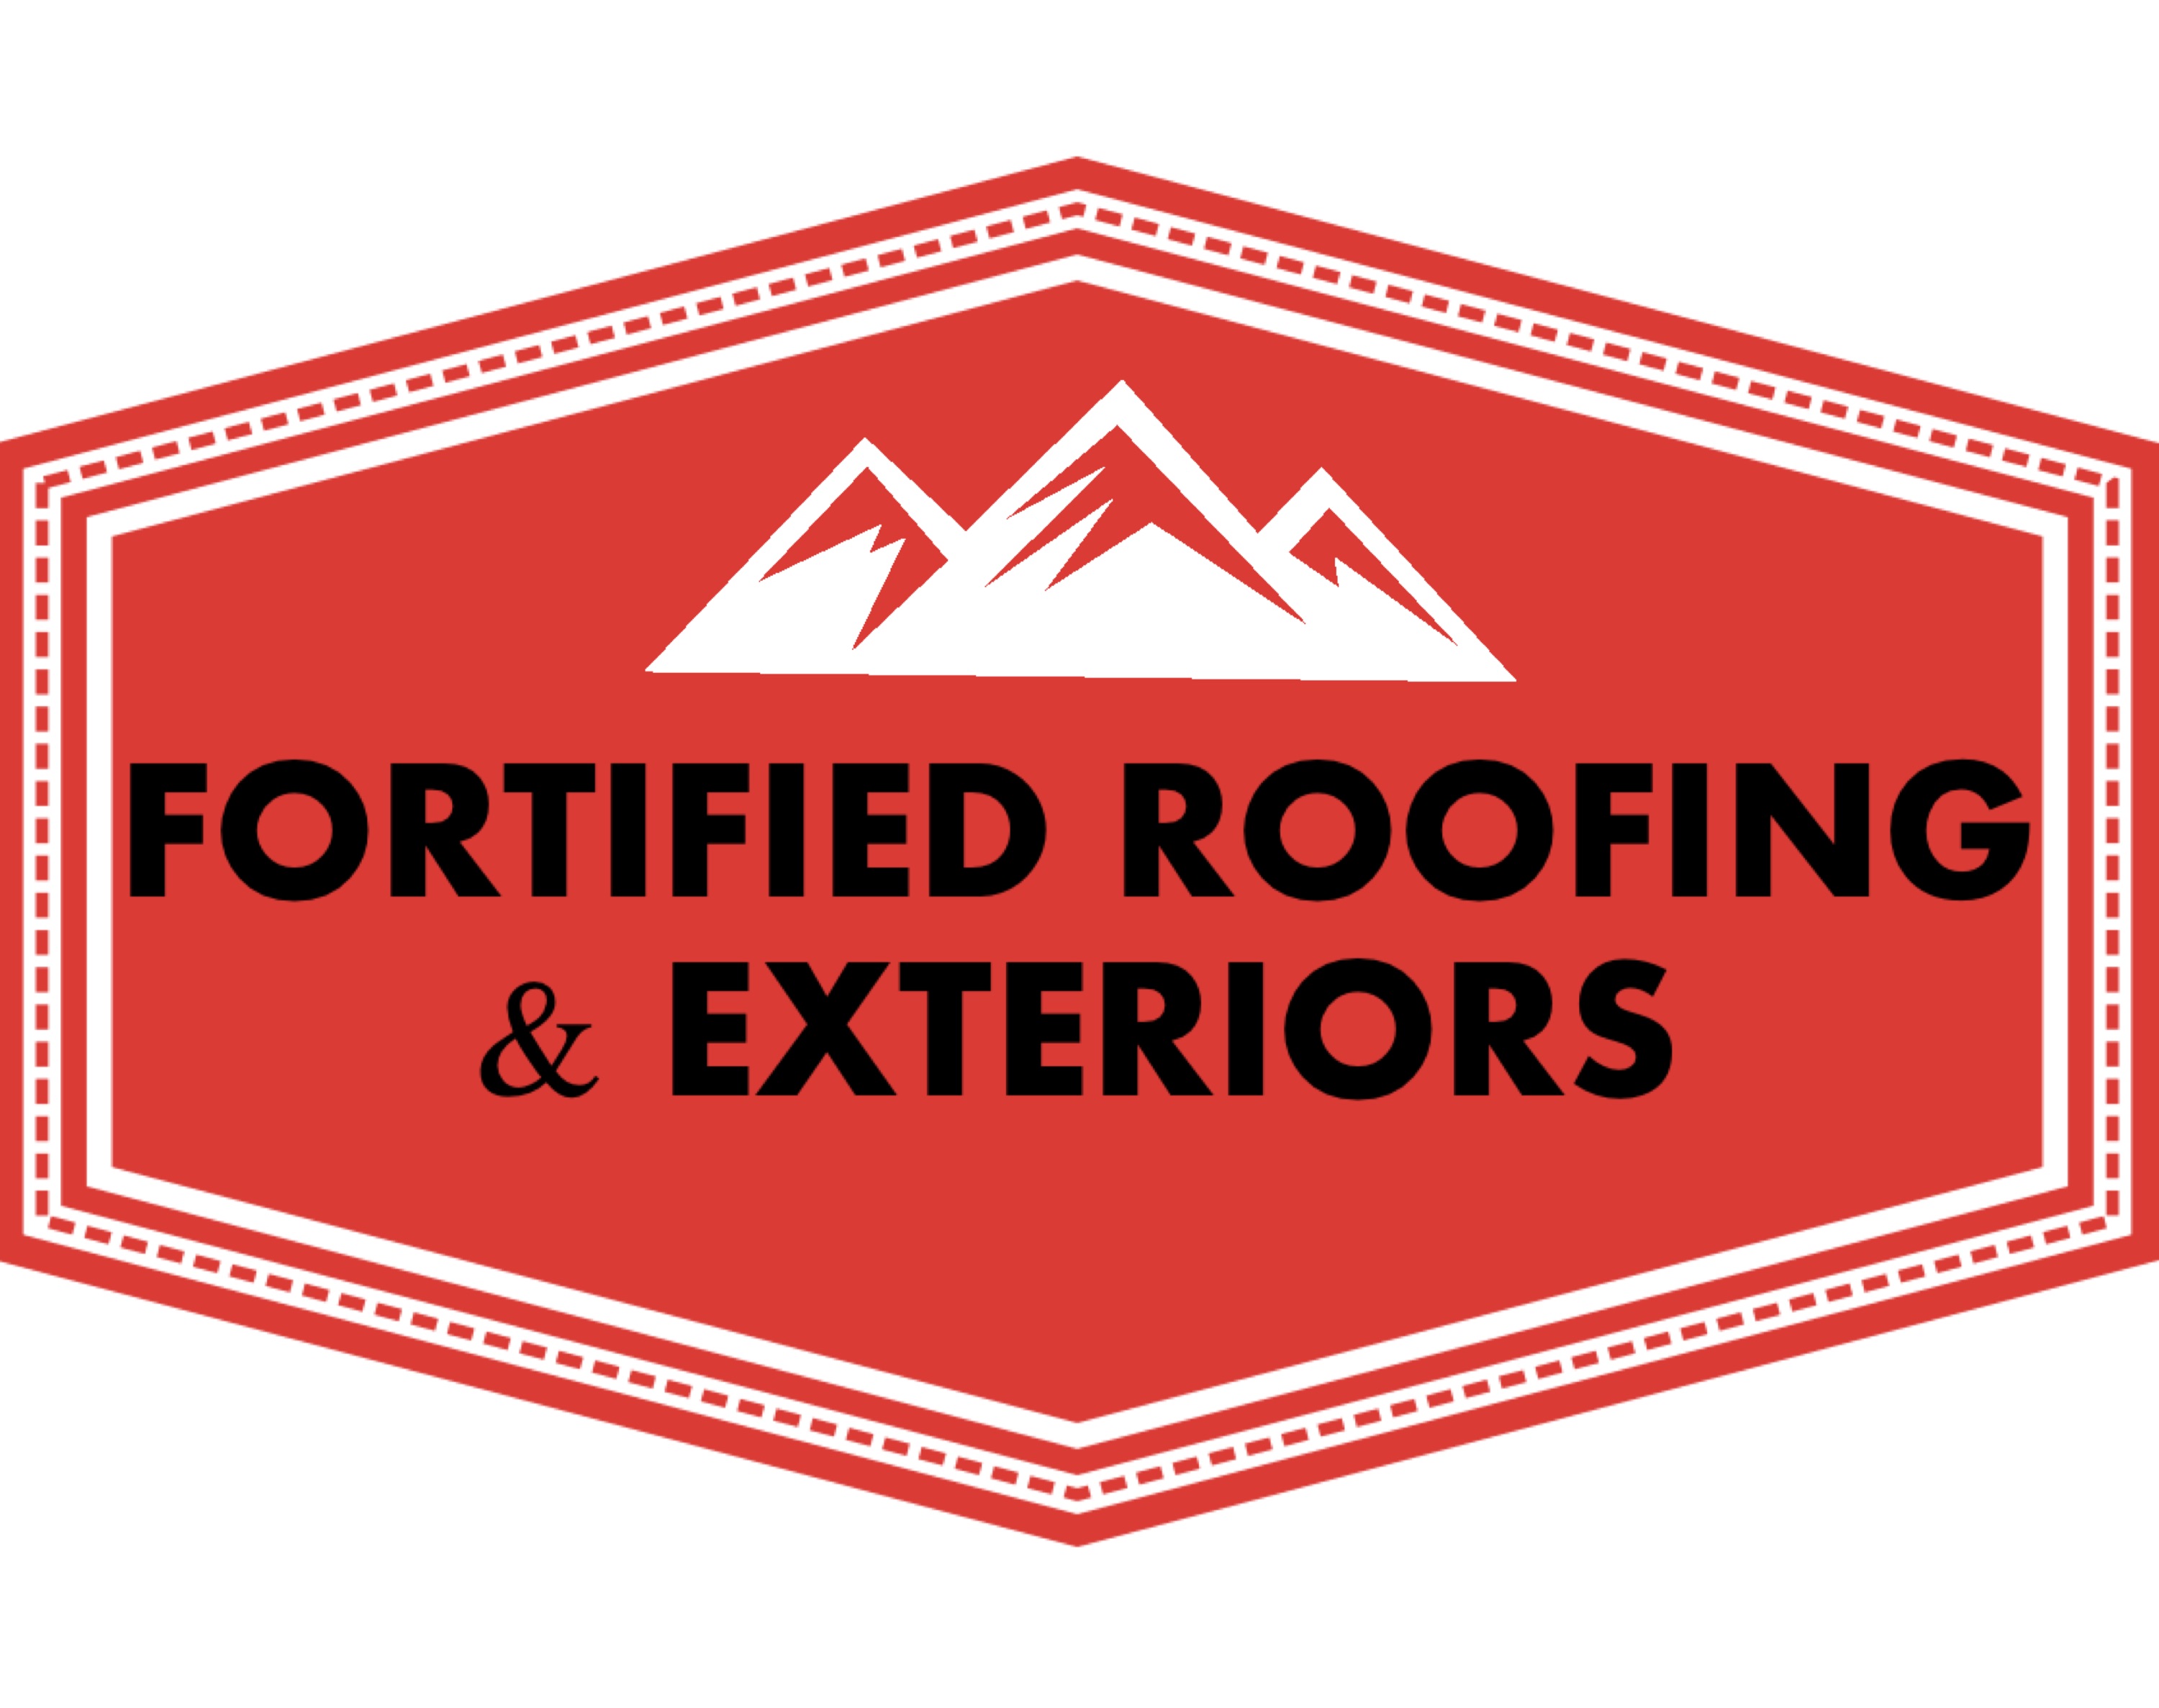 Fortified Roofing & Exteriors Logo